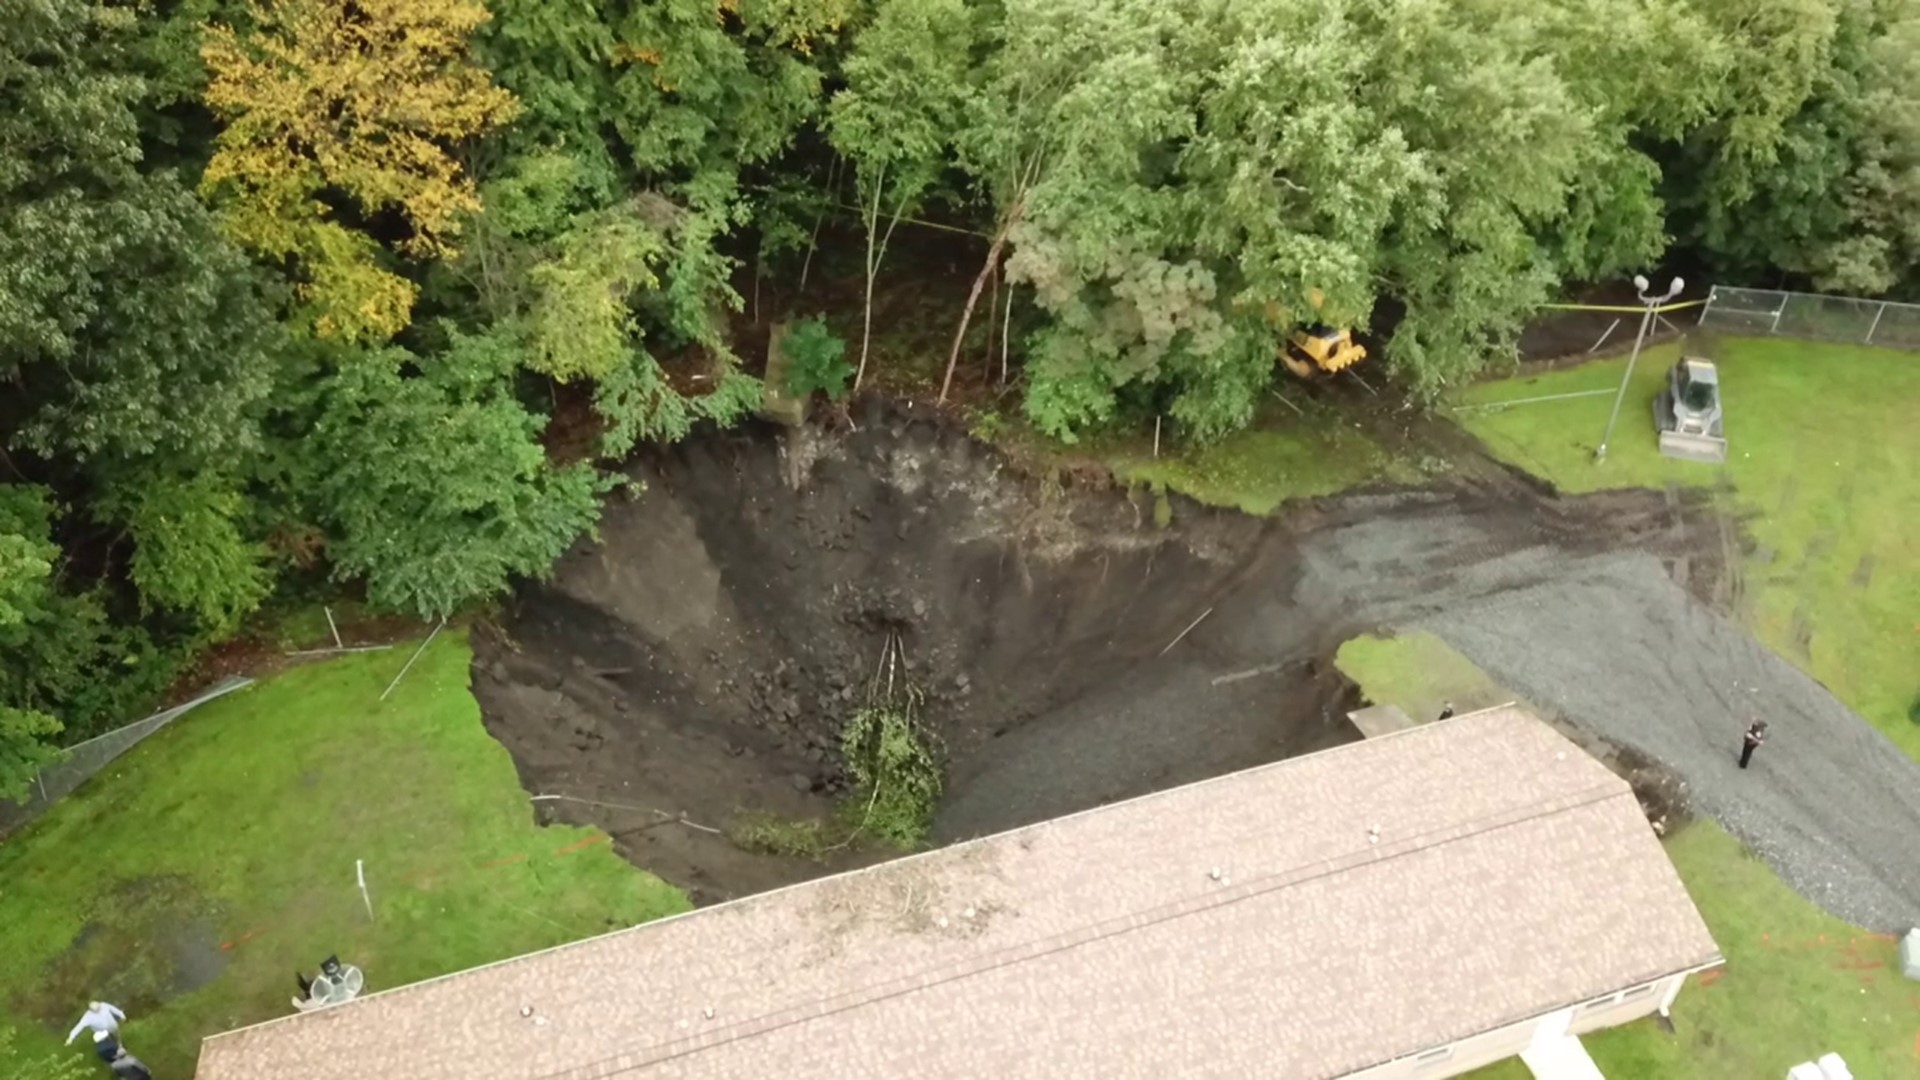 Officials in Glen Lyon say a sinkhole opened right outside of an apartment complex on Rock Street on Sunday.
It's estimated to be 100 feet deep.